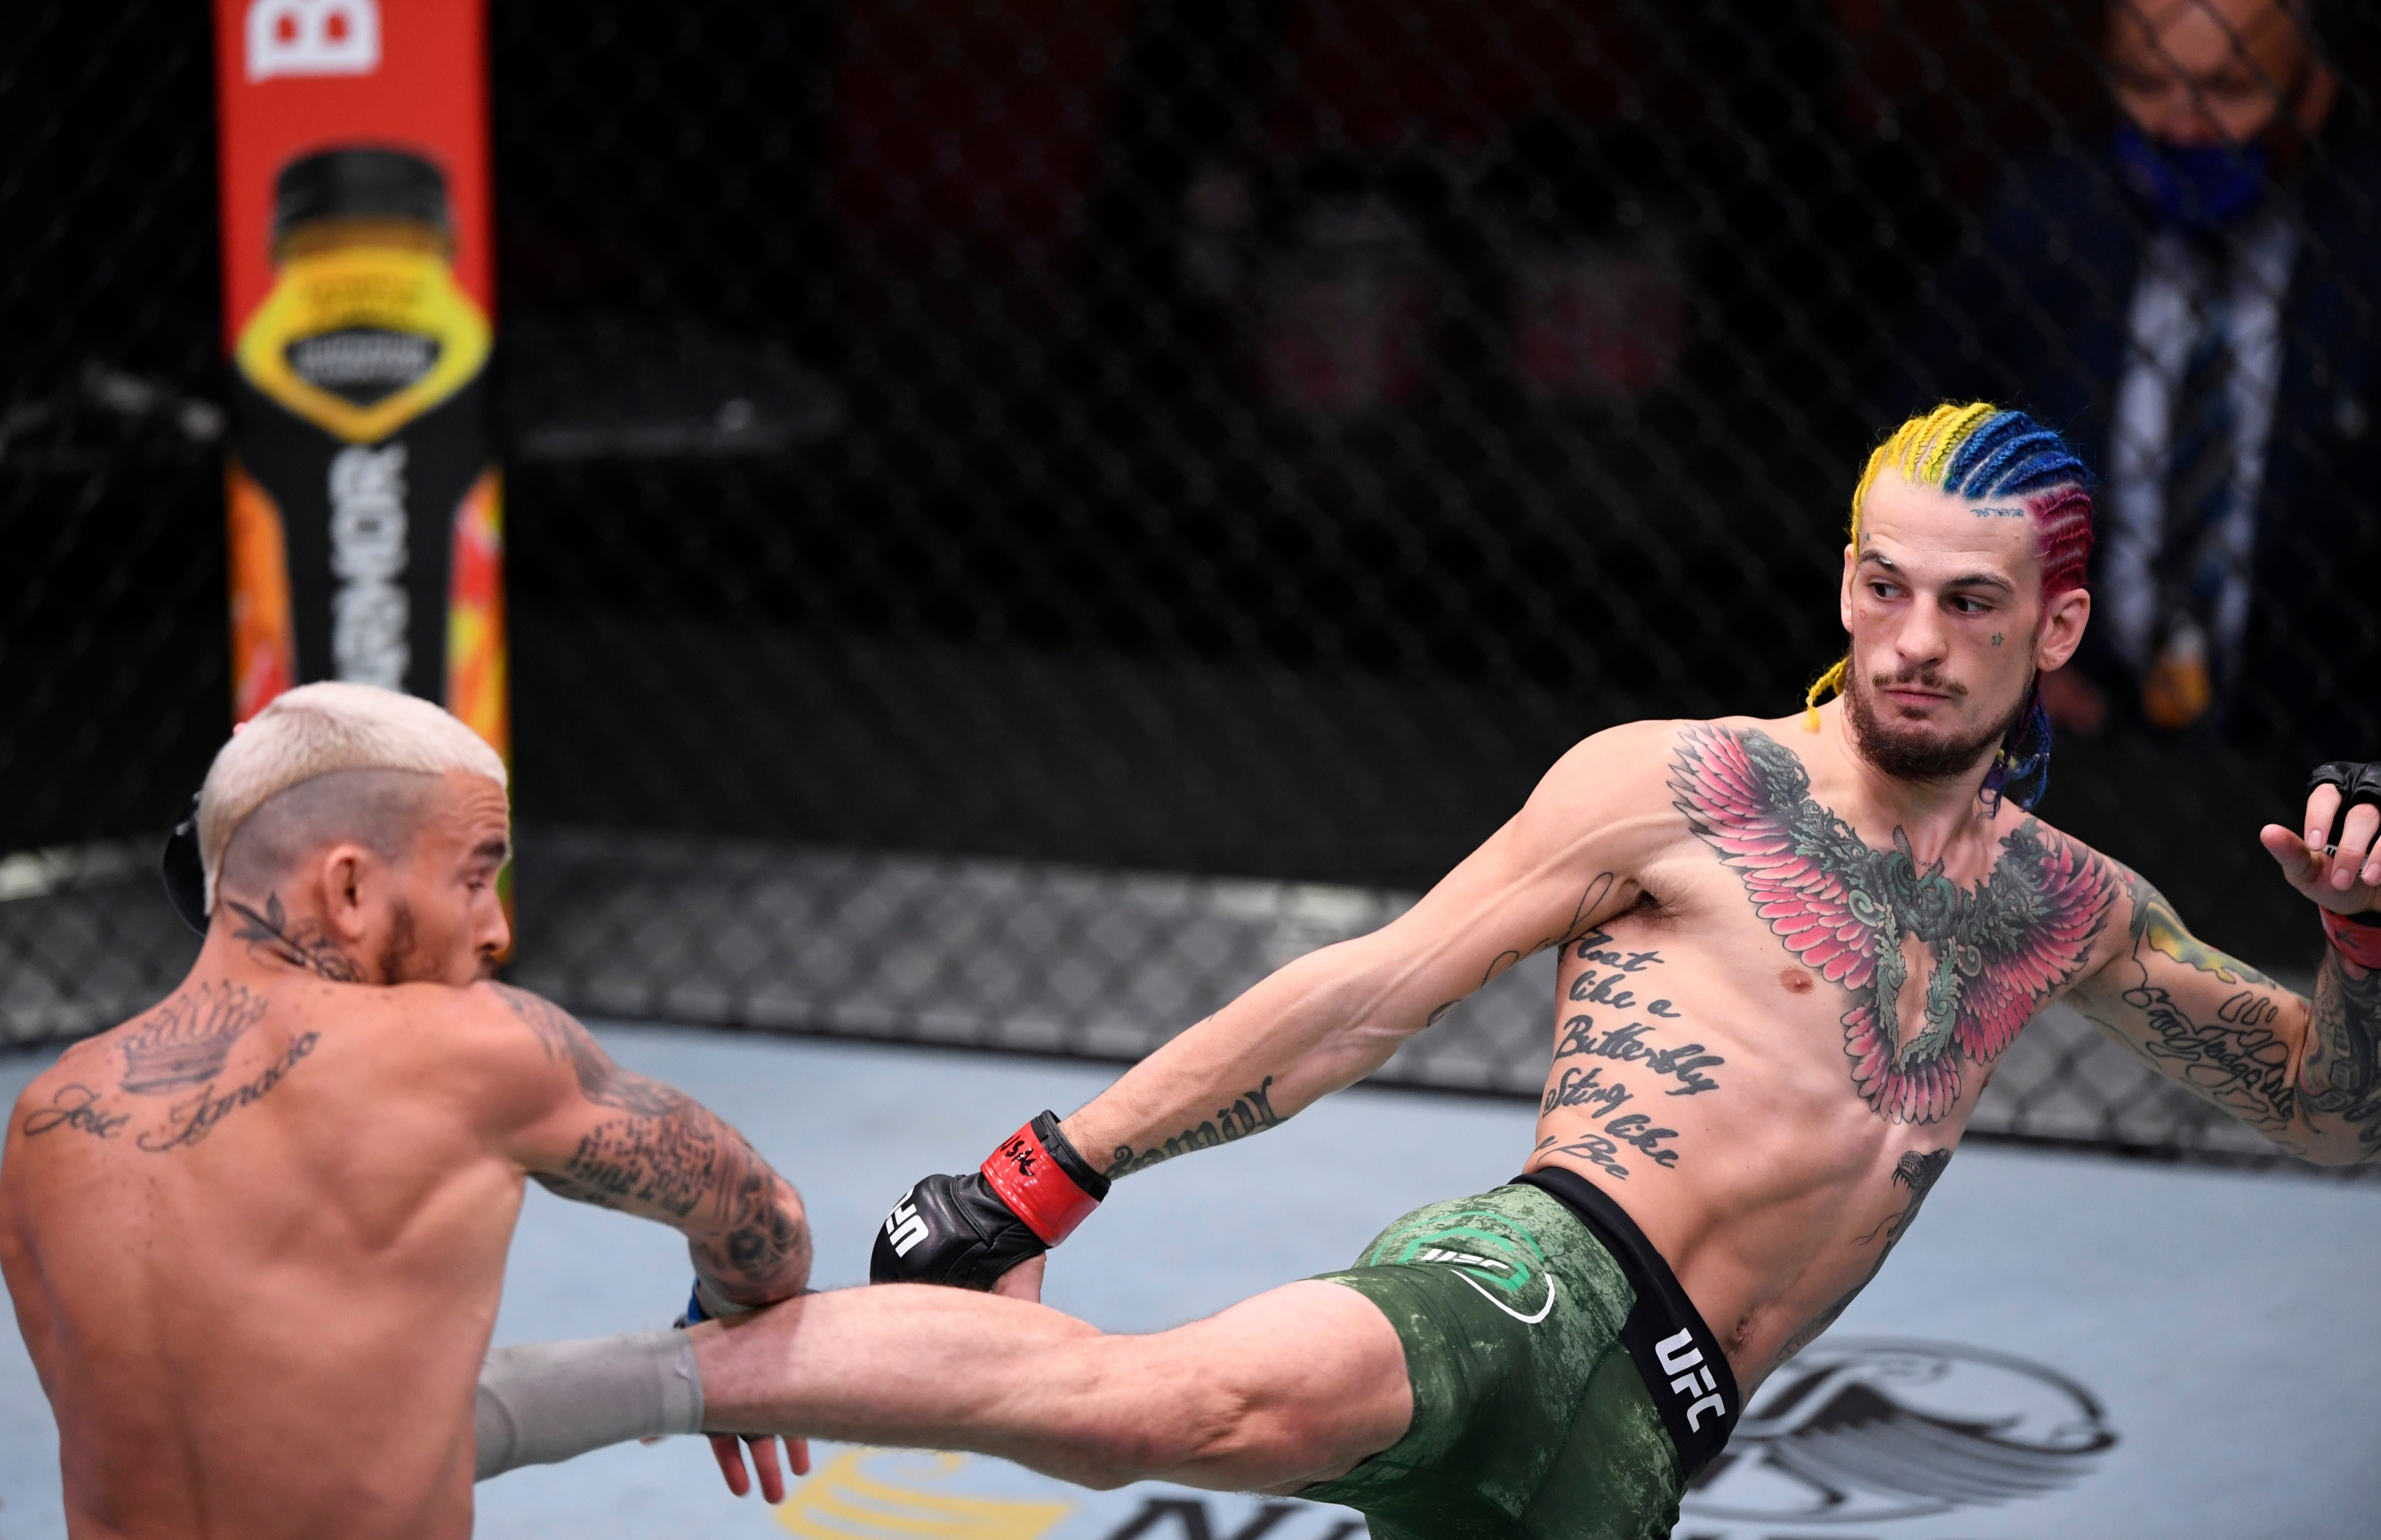 UFC star Sean O'Malley hits back at Chito Vera and rages 'I'll be world champ, he'll be a journeyman' as feud continues